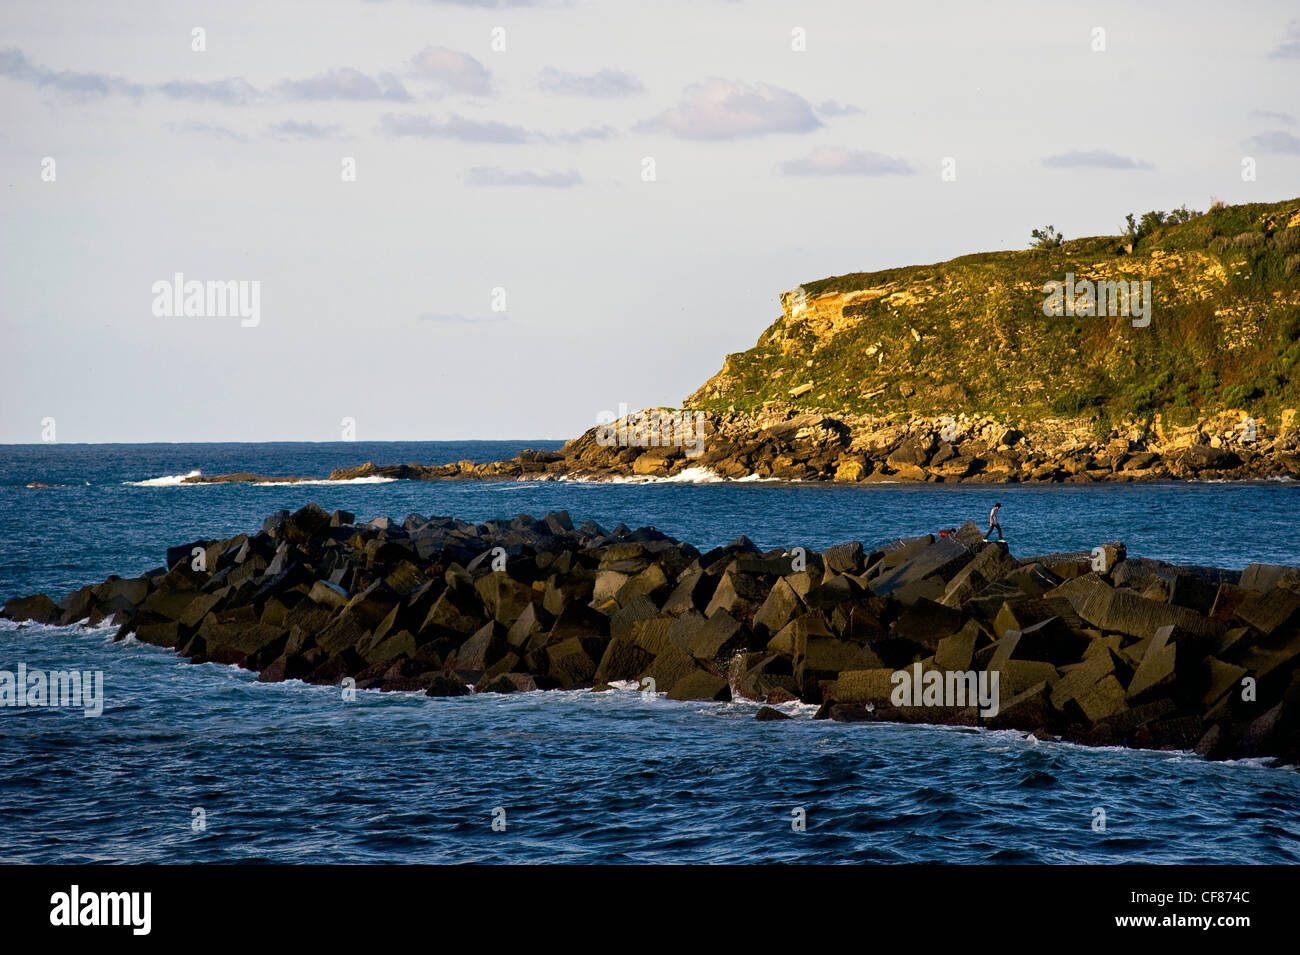 bay of biscay outside san sebastian, basque country, spain Stock Photo